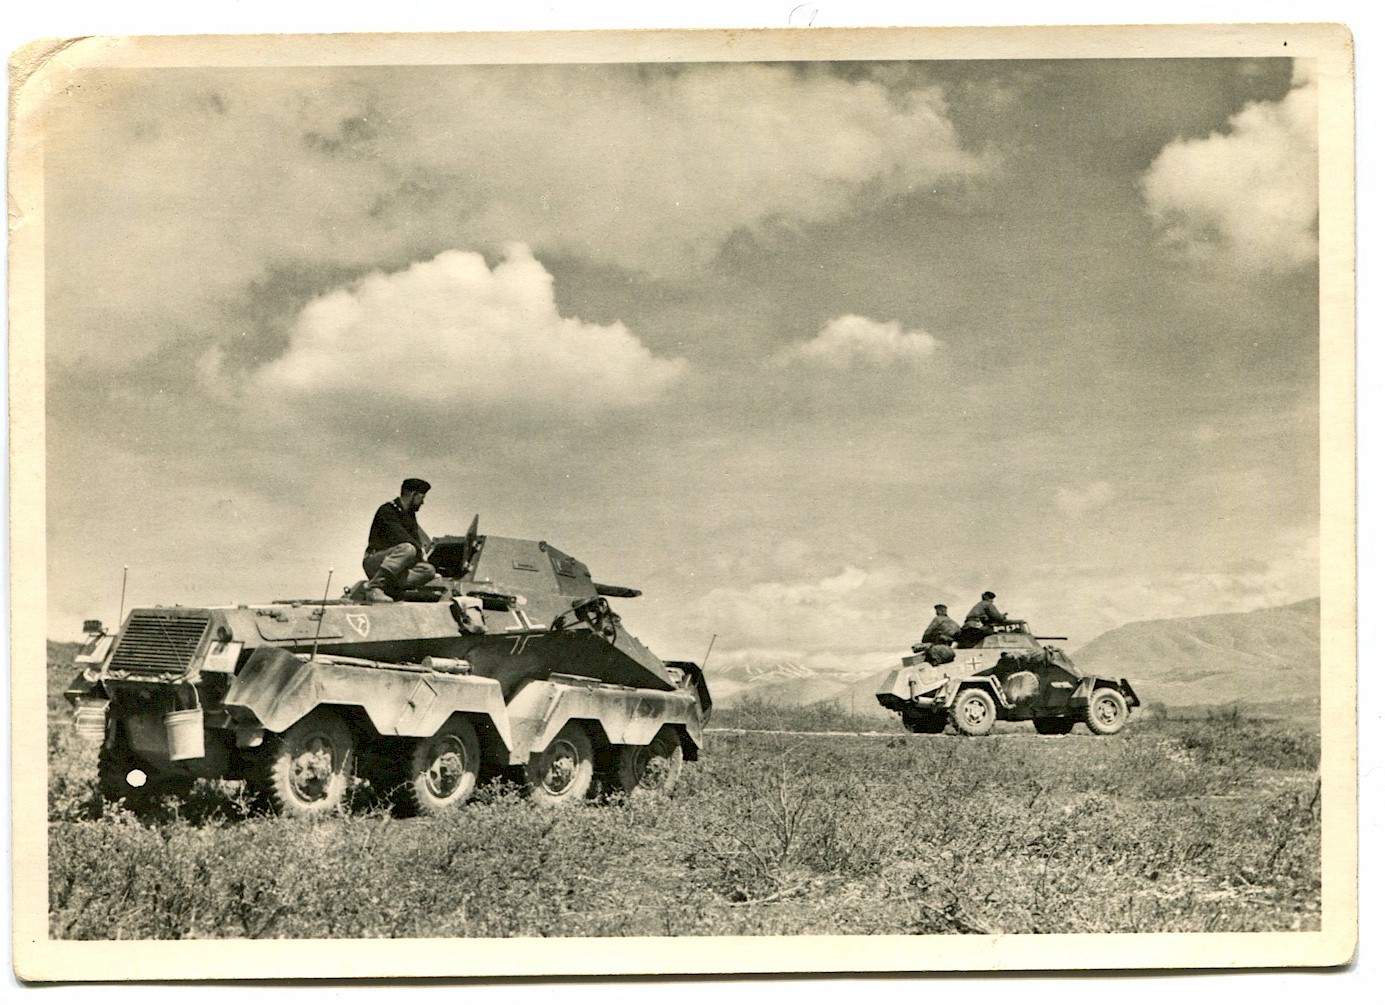 UNSERE WAFFEN SS POST CARD "ARMORED RECONNAISSANCE CARS FORWARD!"